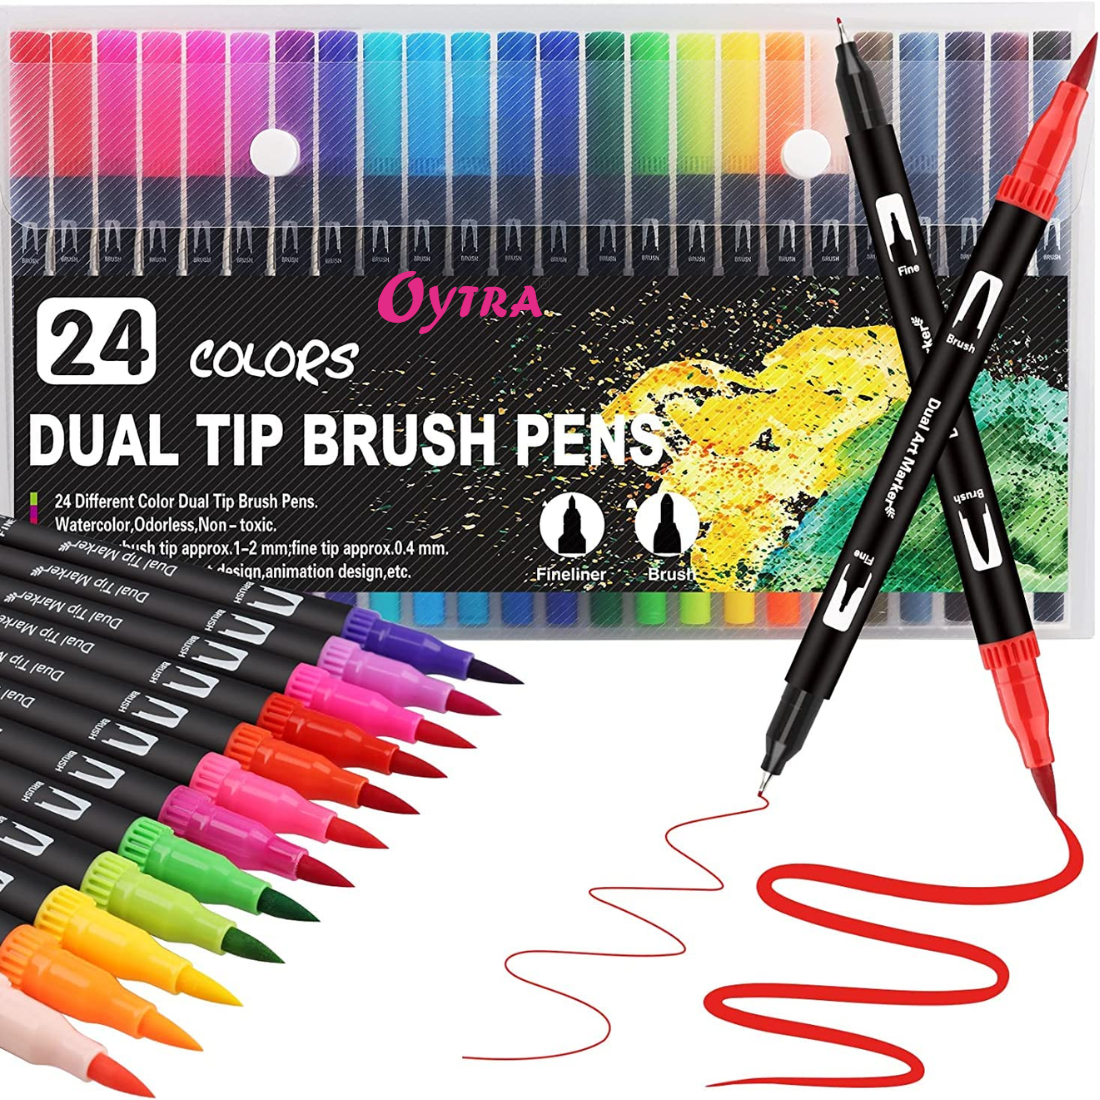 Oficrafted 105 Colors Dual Tip Brush Pens with Brush Bulgaria